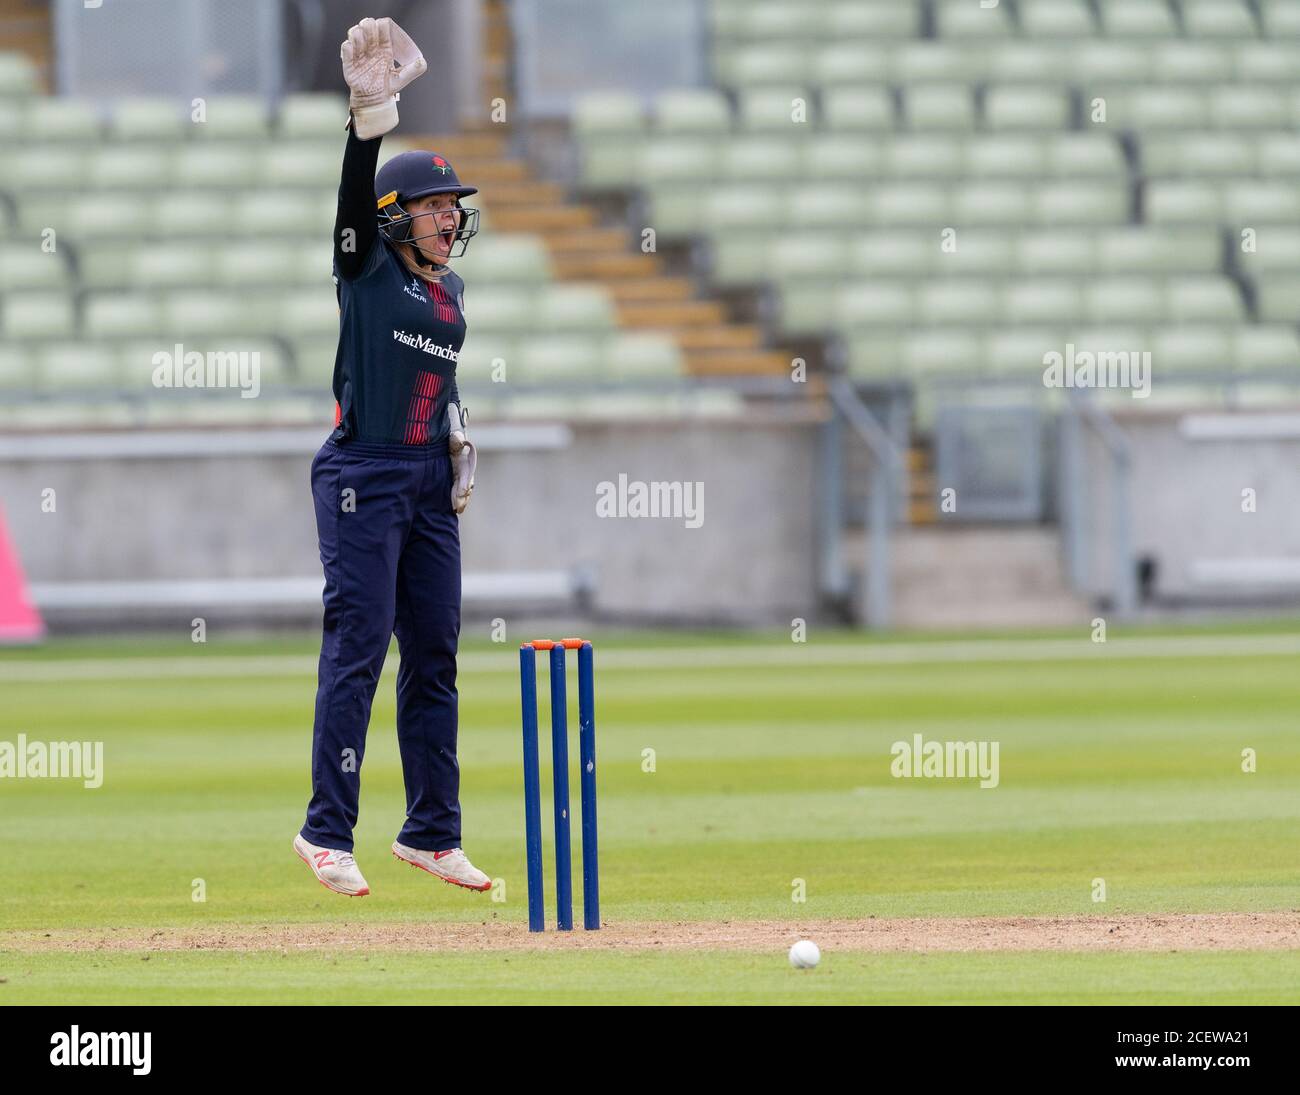 Thunder's wicket keeper Ellie Threlkeld with a shout in a Rachael Heyhoe Flint Trophy match against Central Sparks played at Edgbaston Cricket Ground Stock Photo